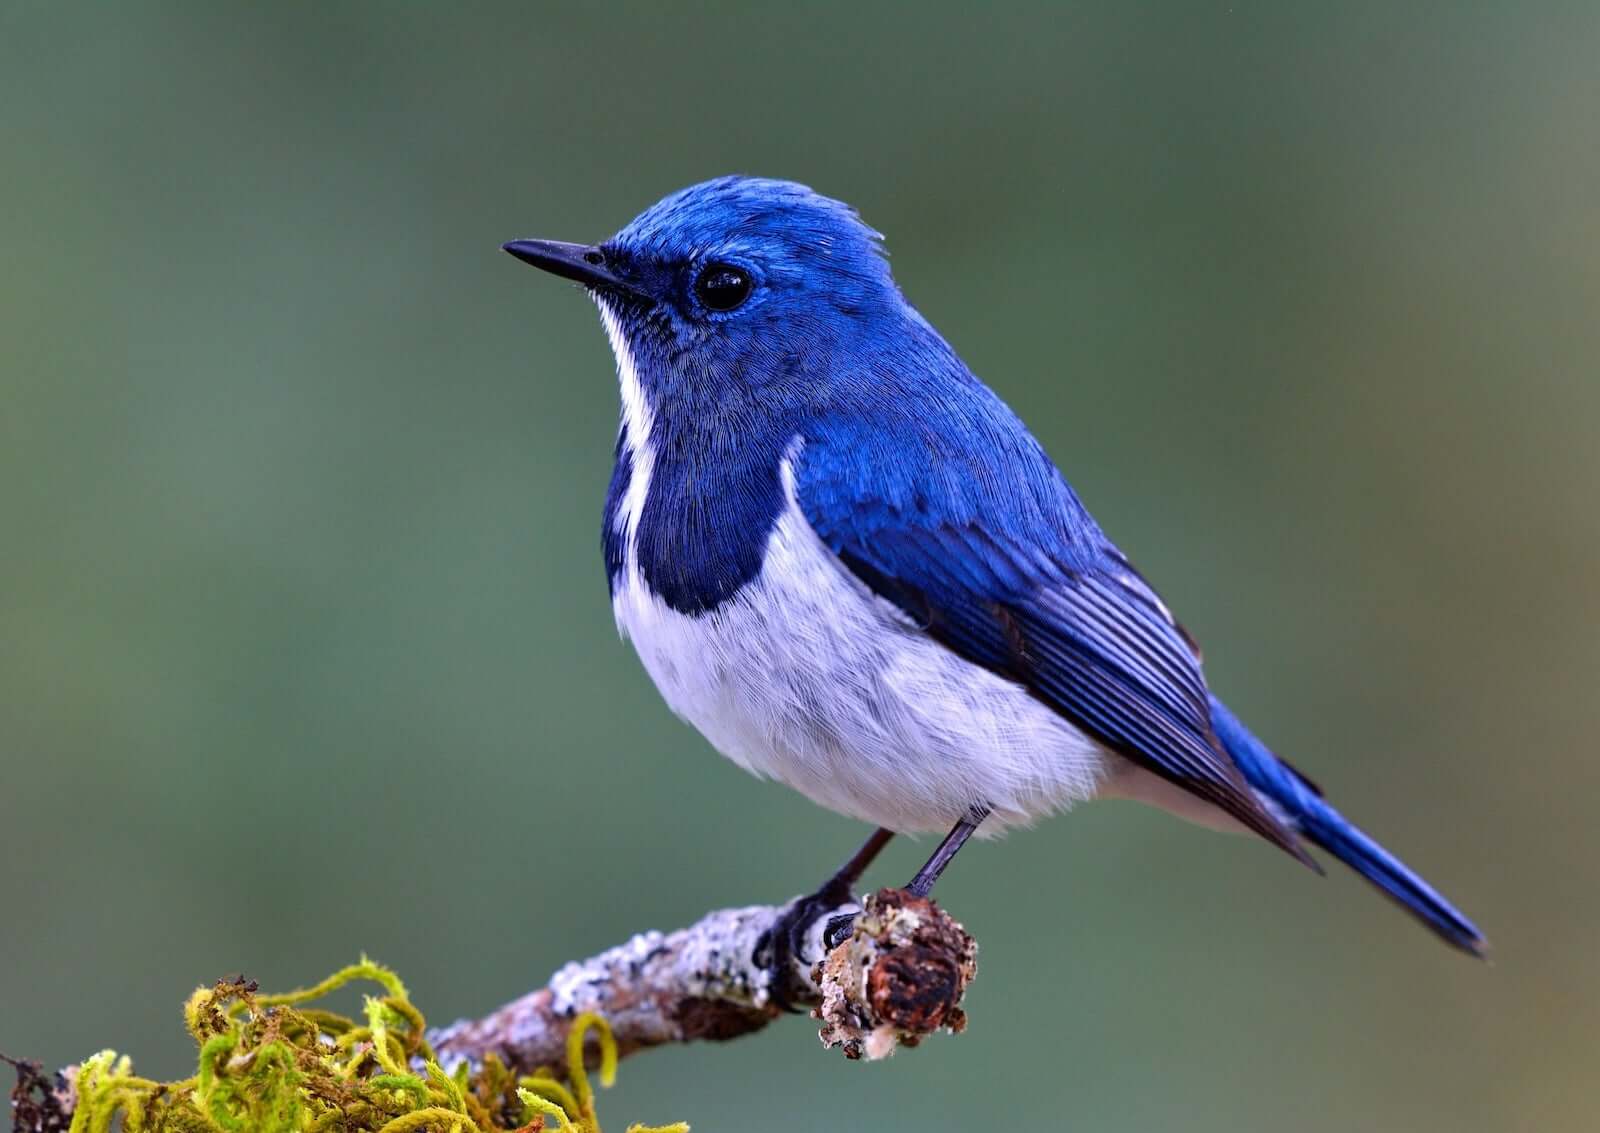 Image of a blue bird in the wild